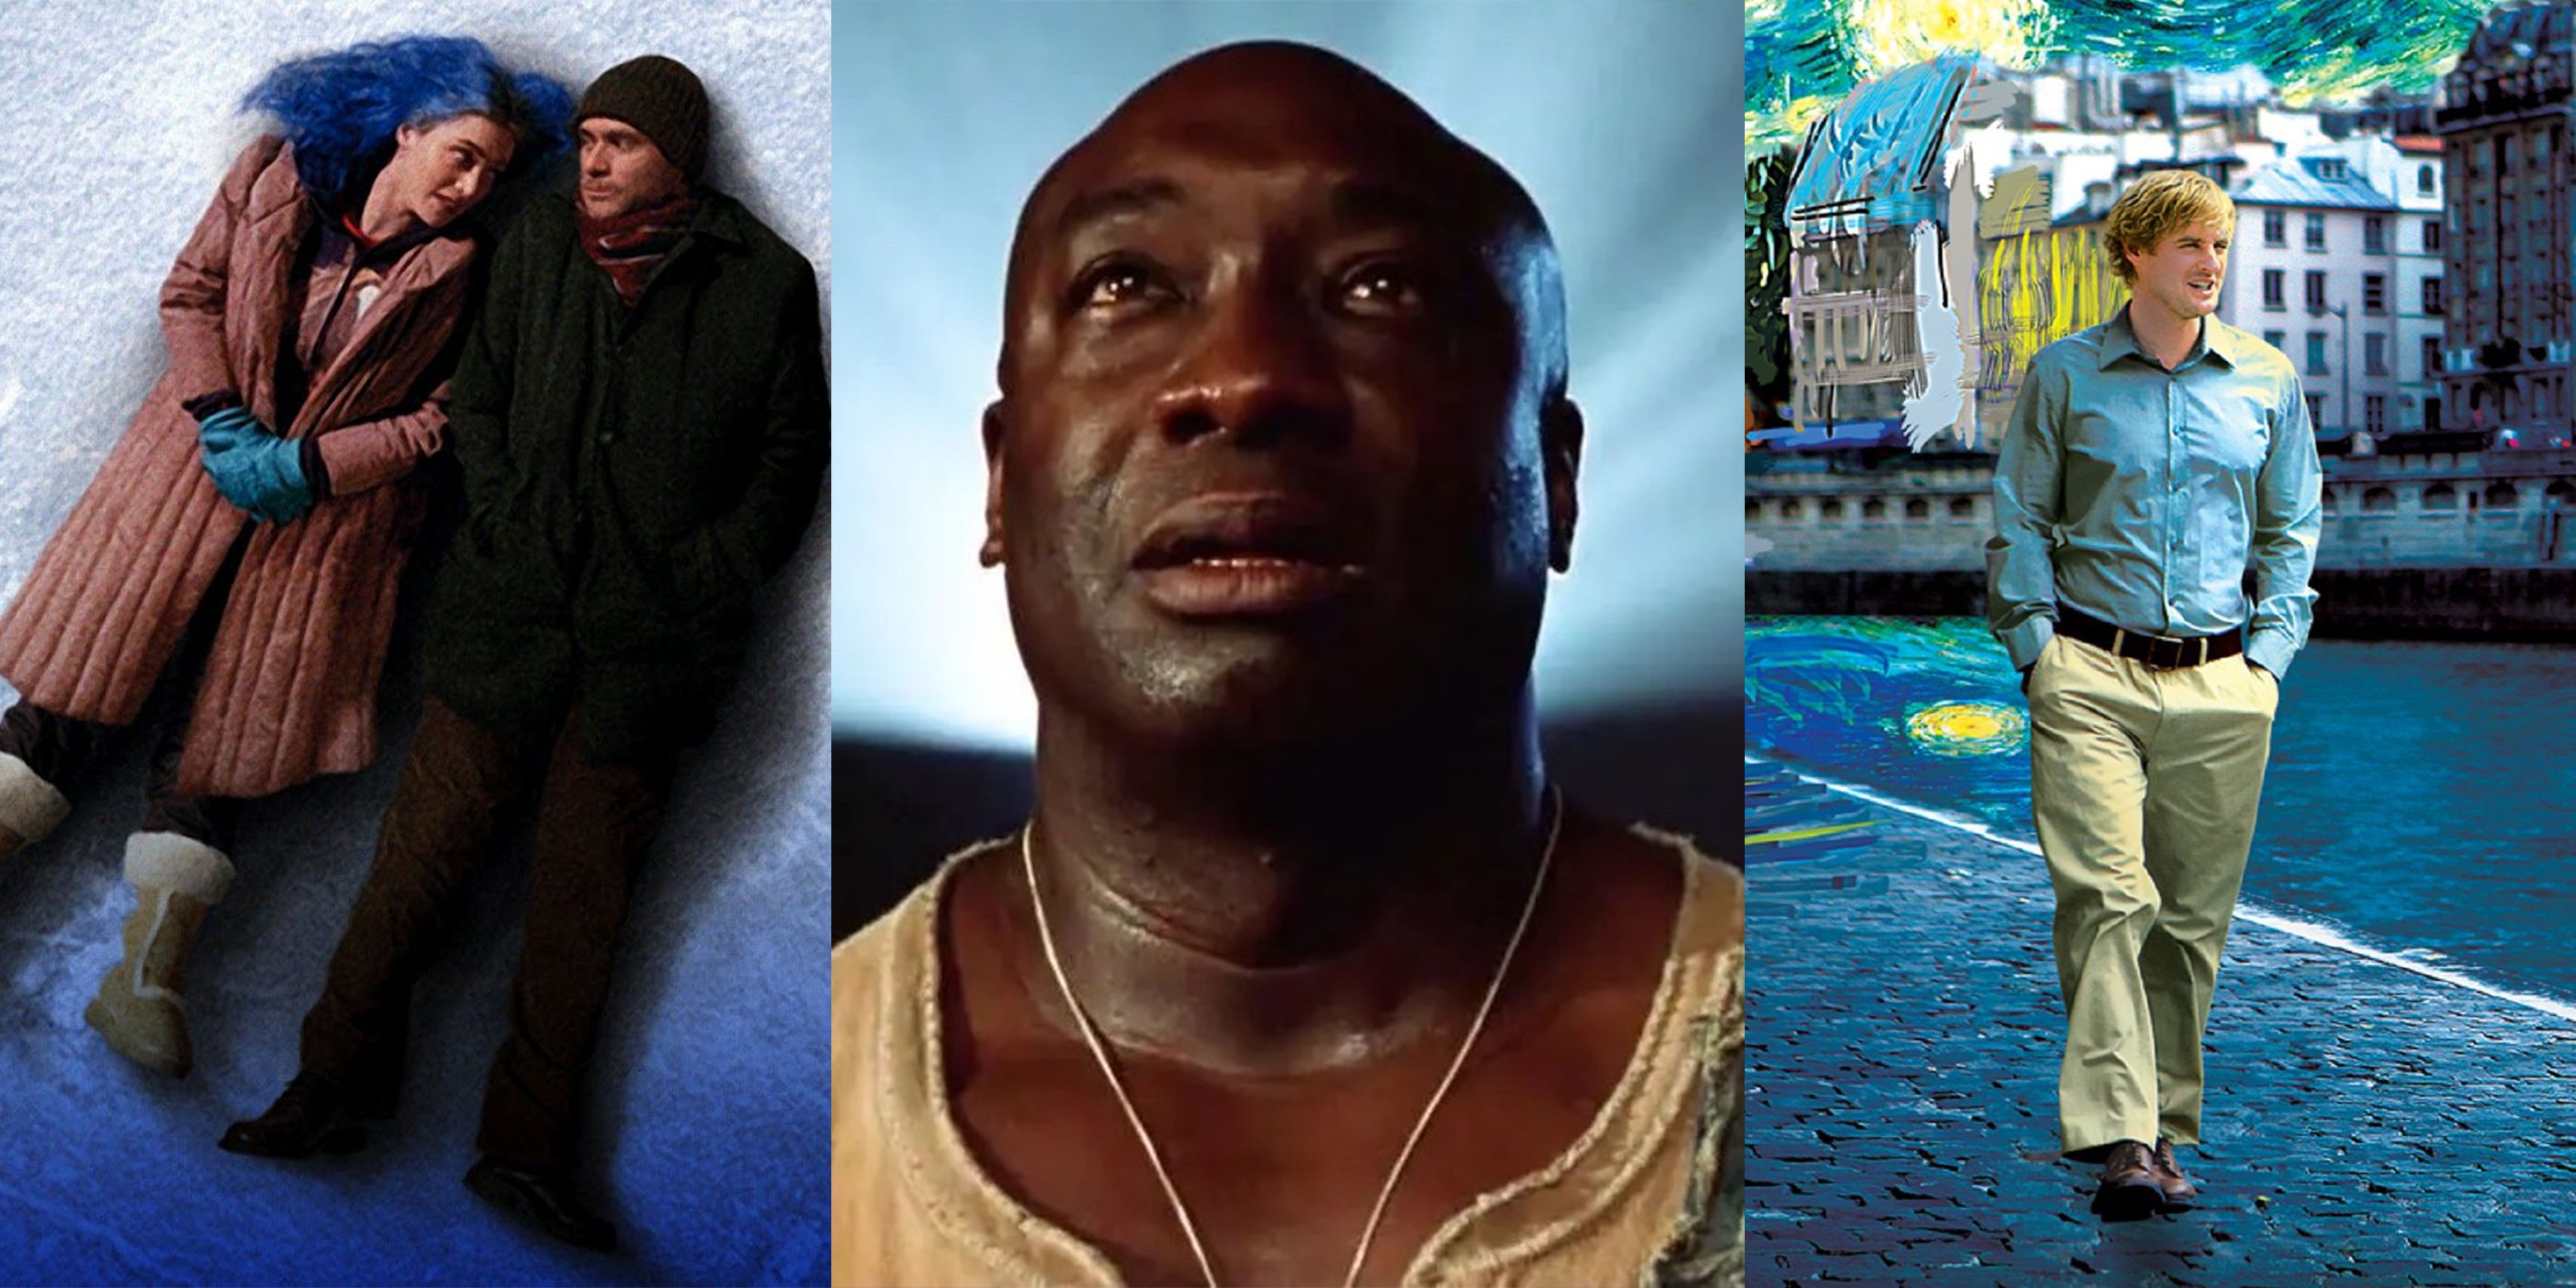 Forgotten Sci-fi and Fantasy movies, the green mile, midnight in paris, eternal sunshine of the spotless mind